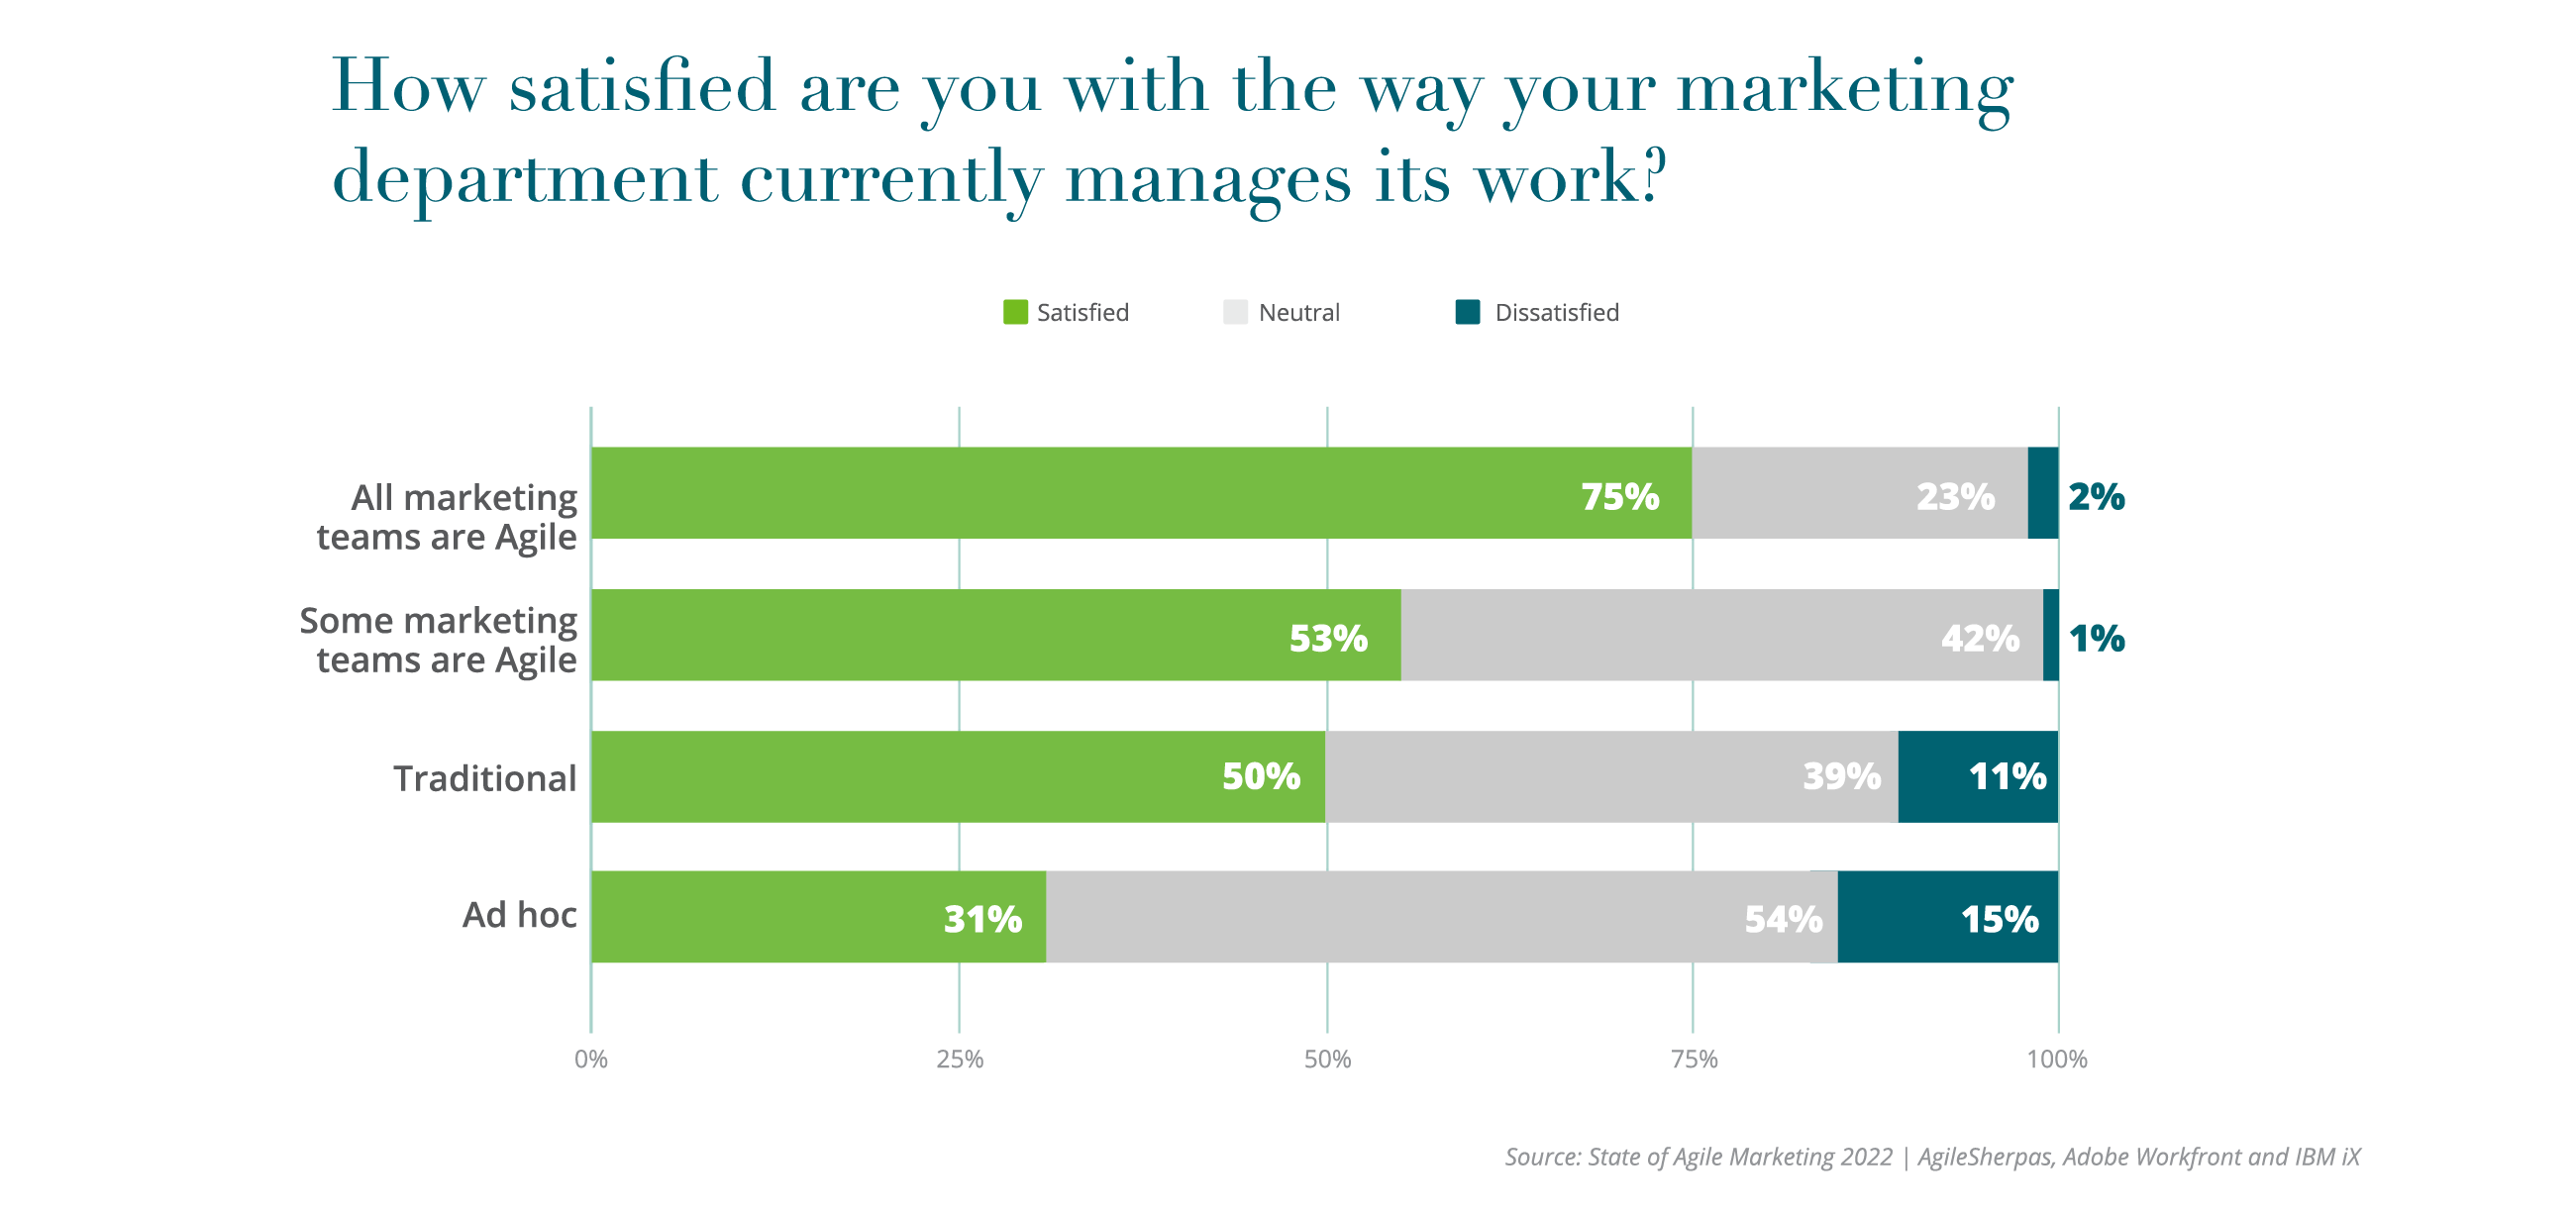 Annual State of Agile Marketing Report 2022 How satisfied are you with the way your marketing department currently manages its work